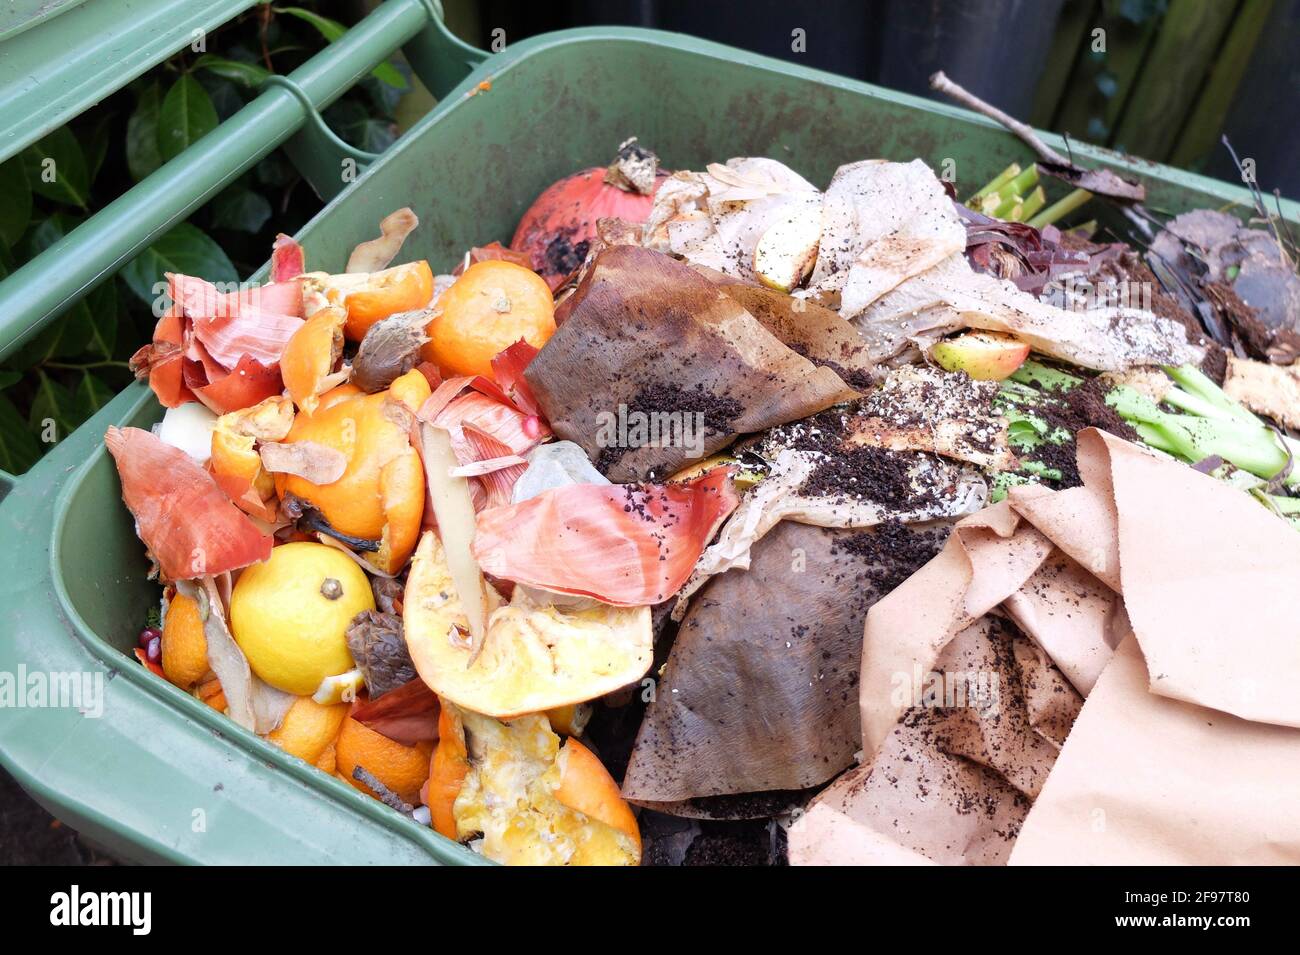 Waste from the kitchen in the organic bin Stock Photo